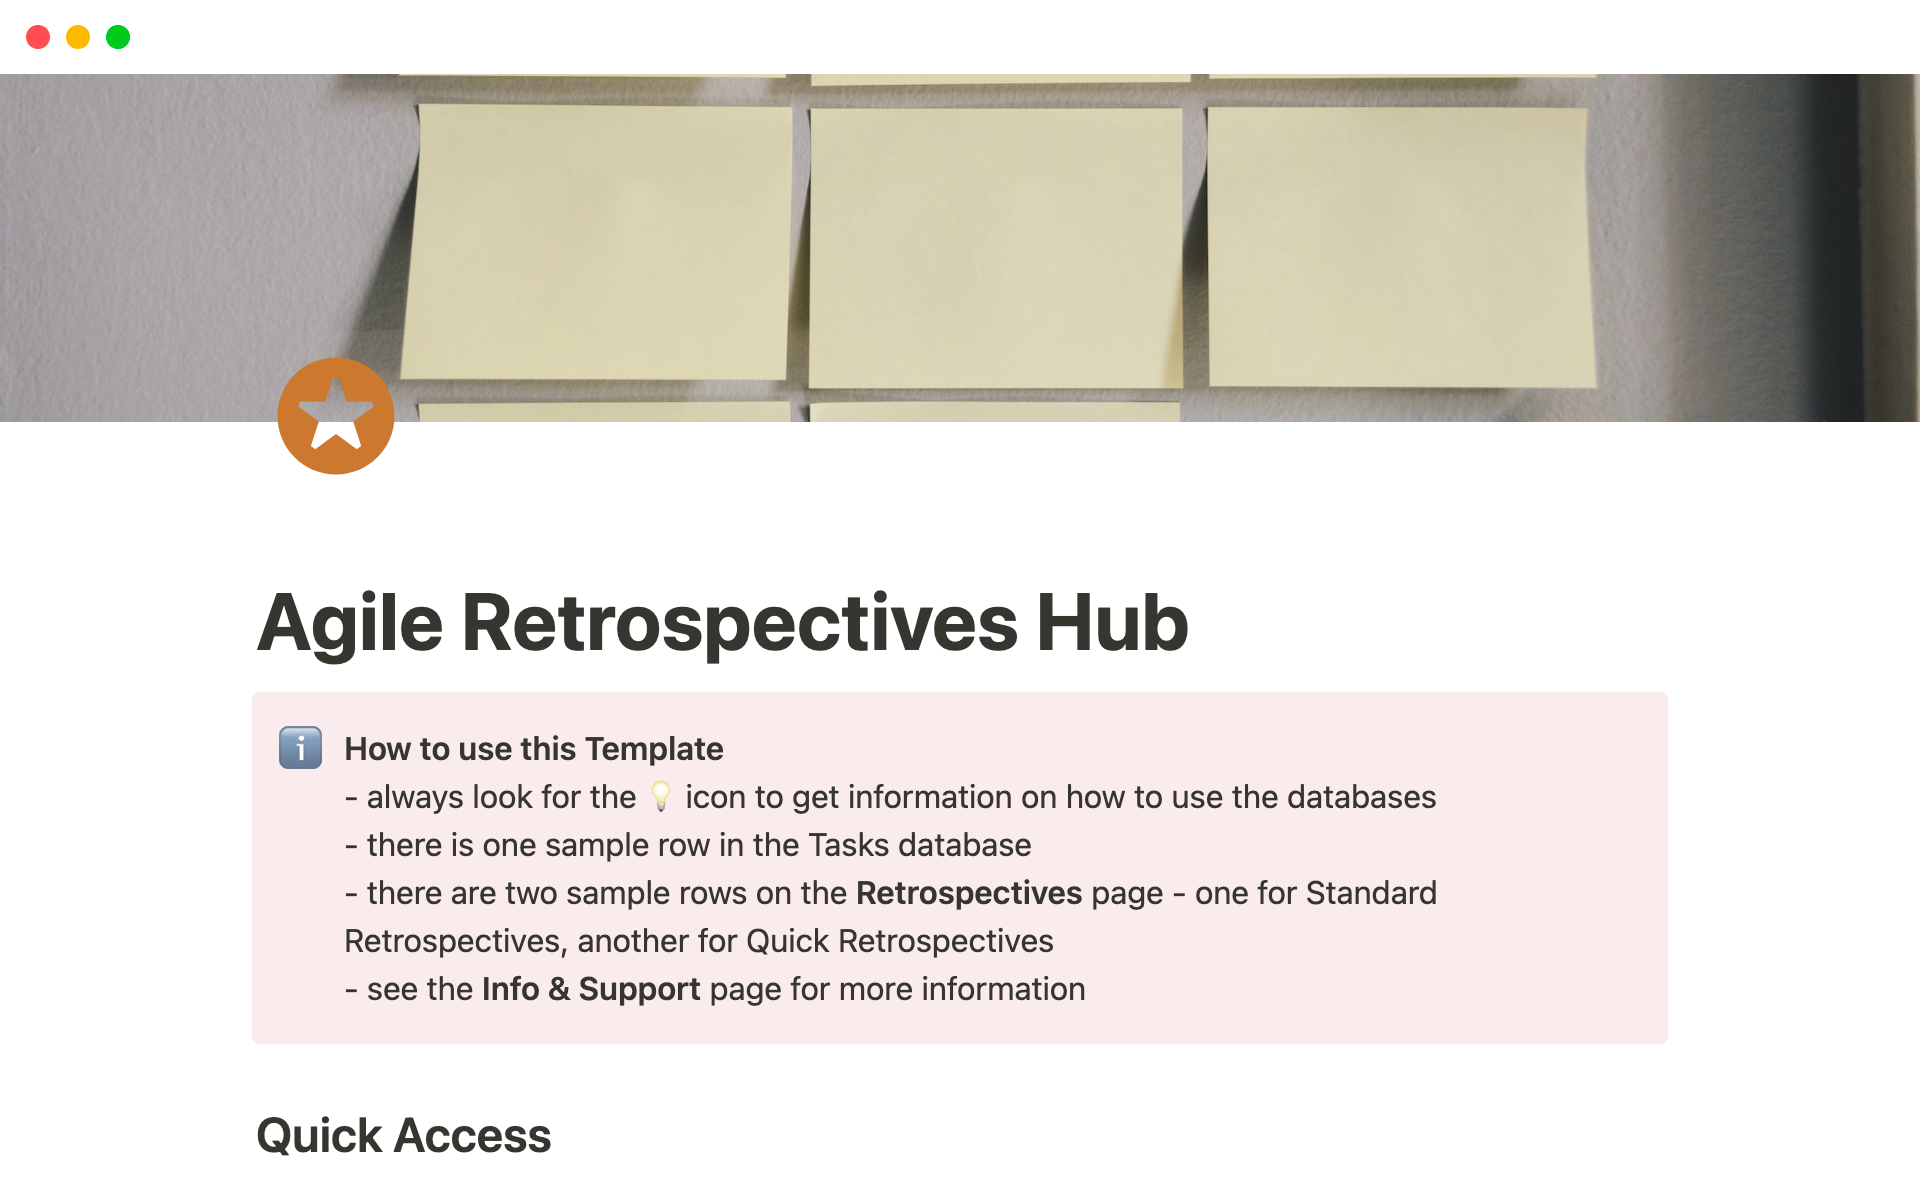 This template will help your team to fulfill the reason for doing retrospectives - to identify areas for improvement and make the necessary adjustments to become more efficient and effective.